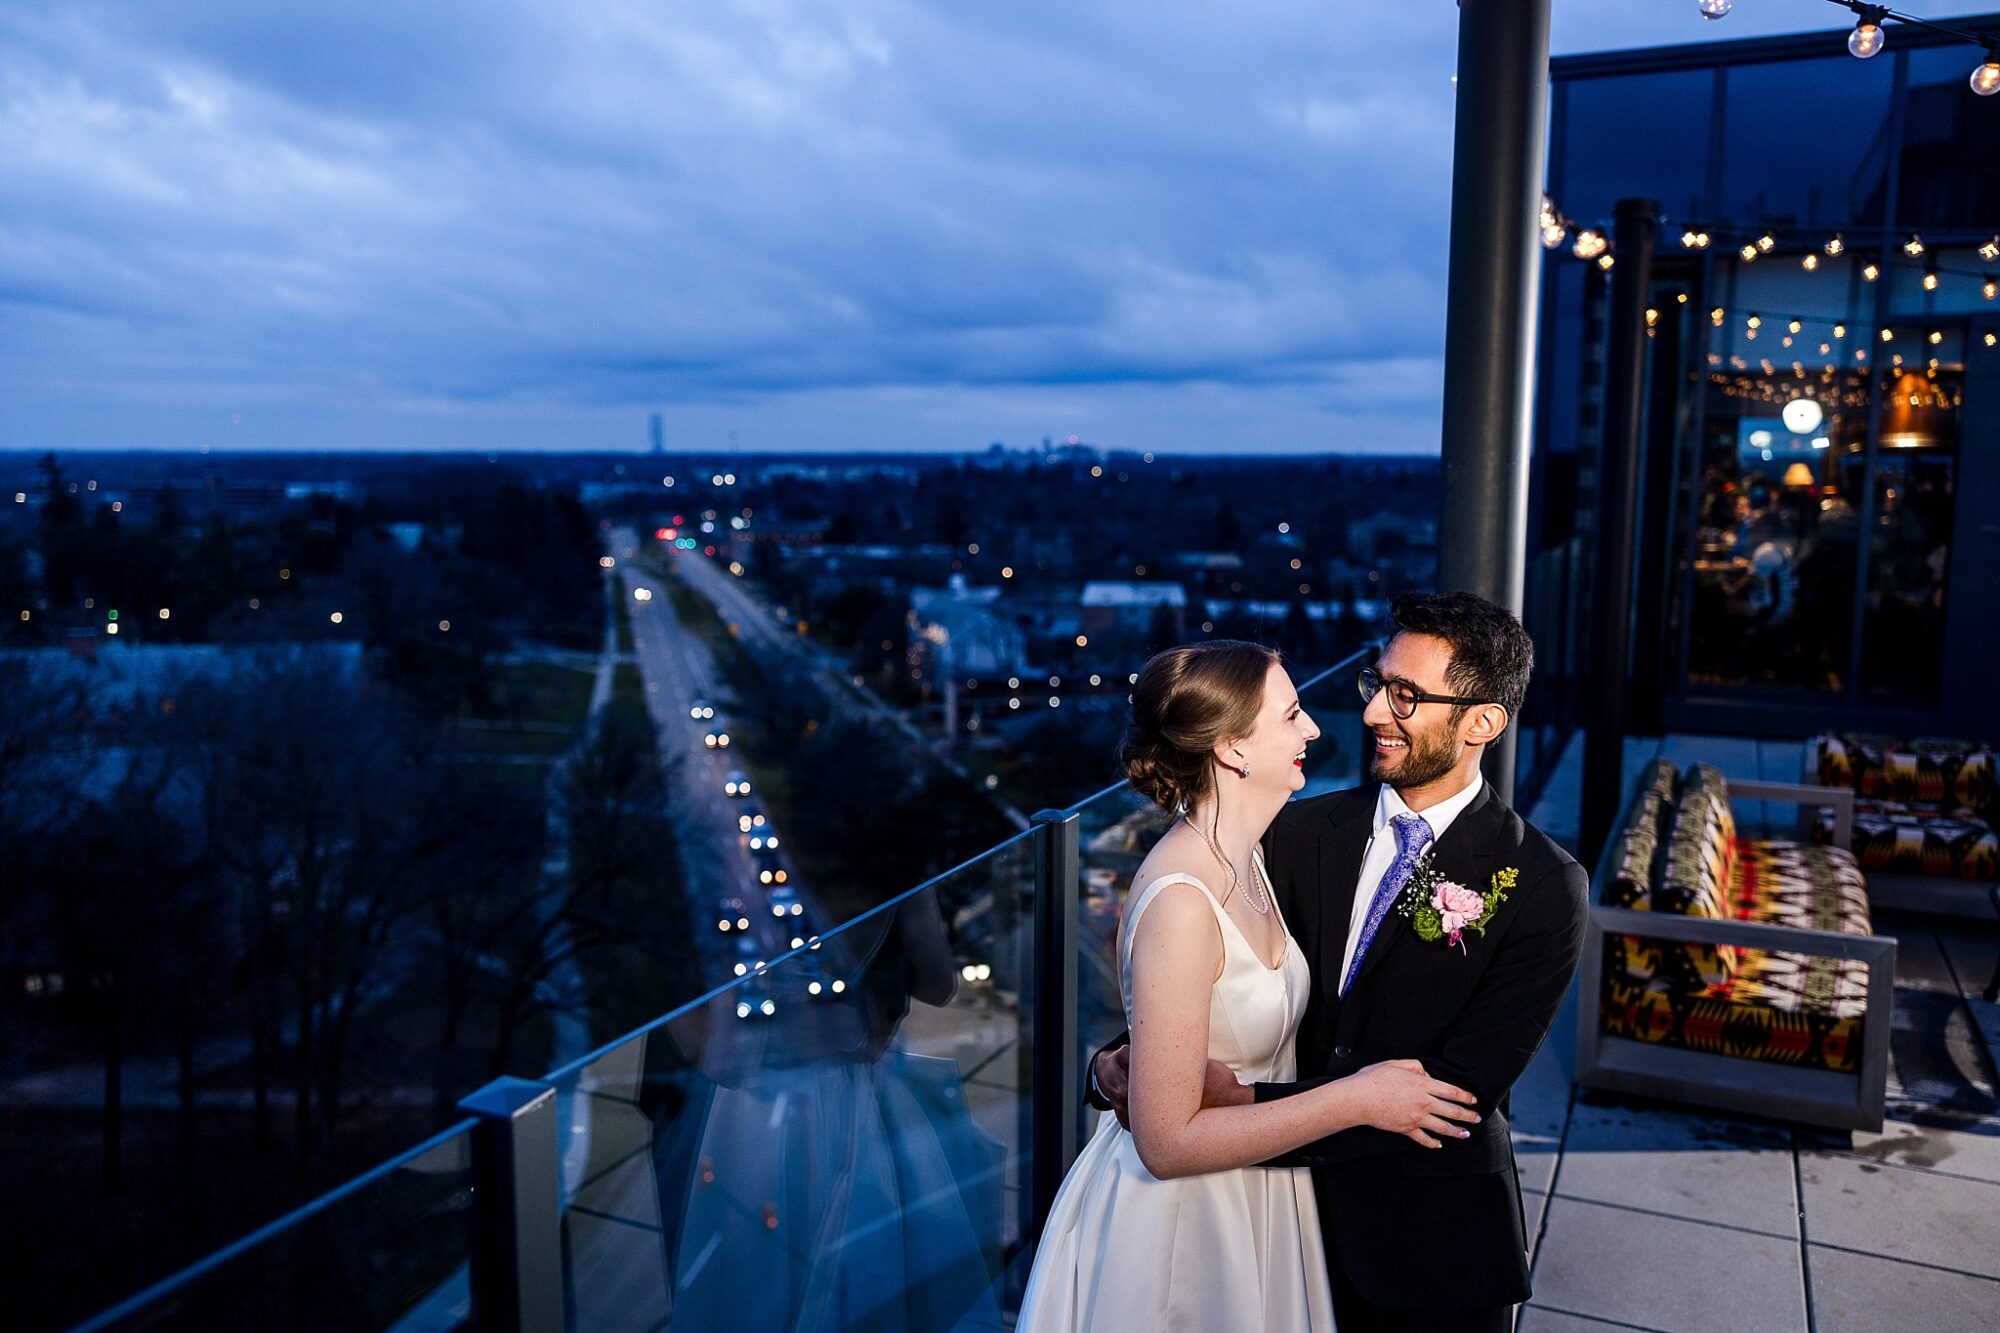 Wedding photographs of a bride and groom smiling while standing on the rooftop at the Graduate Hotel in East Lansing, Michigan at night with blue clouds